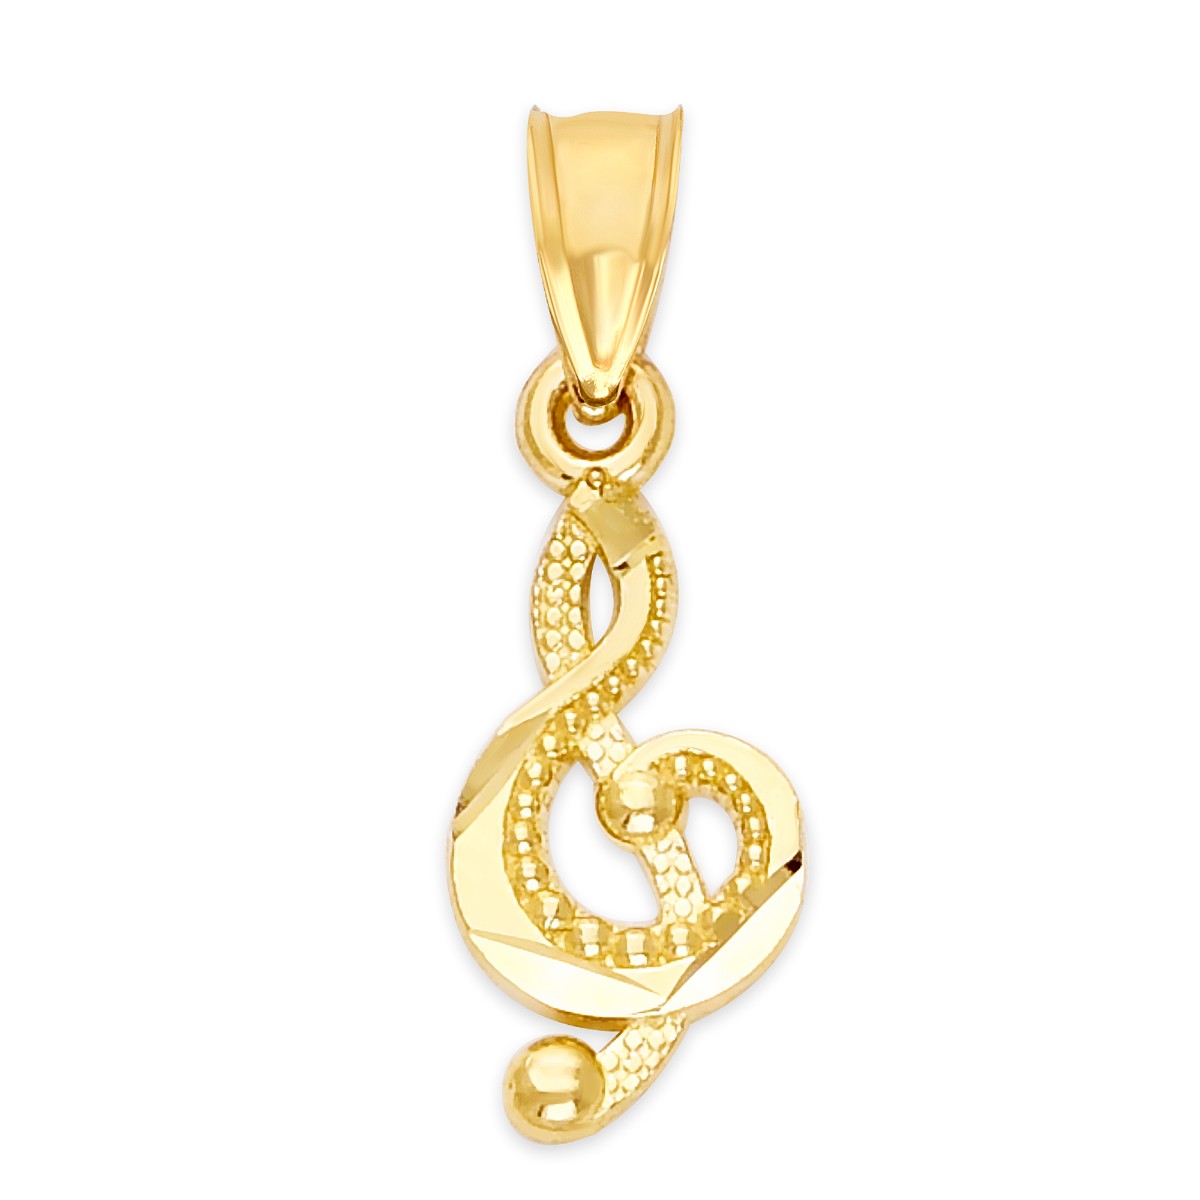 Solid Gold Music Note Pendant - 10k or 14k